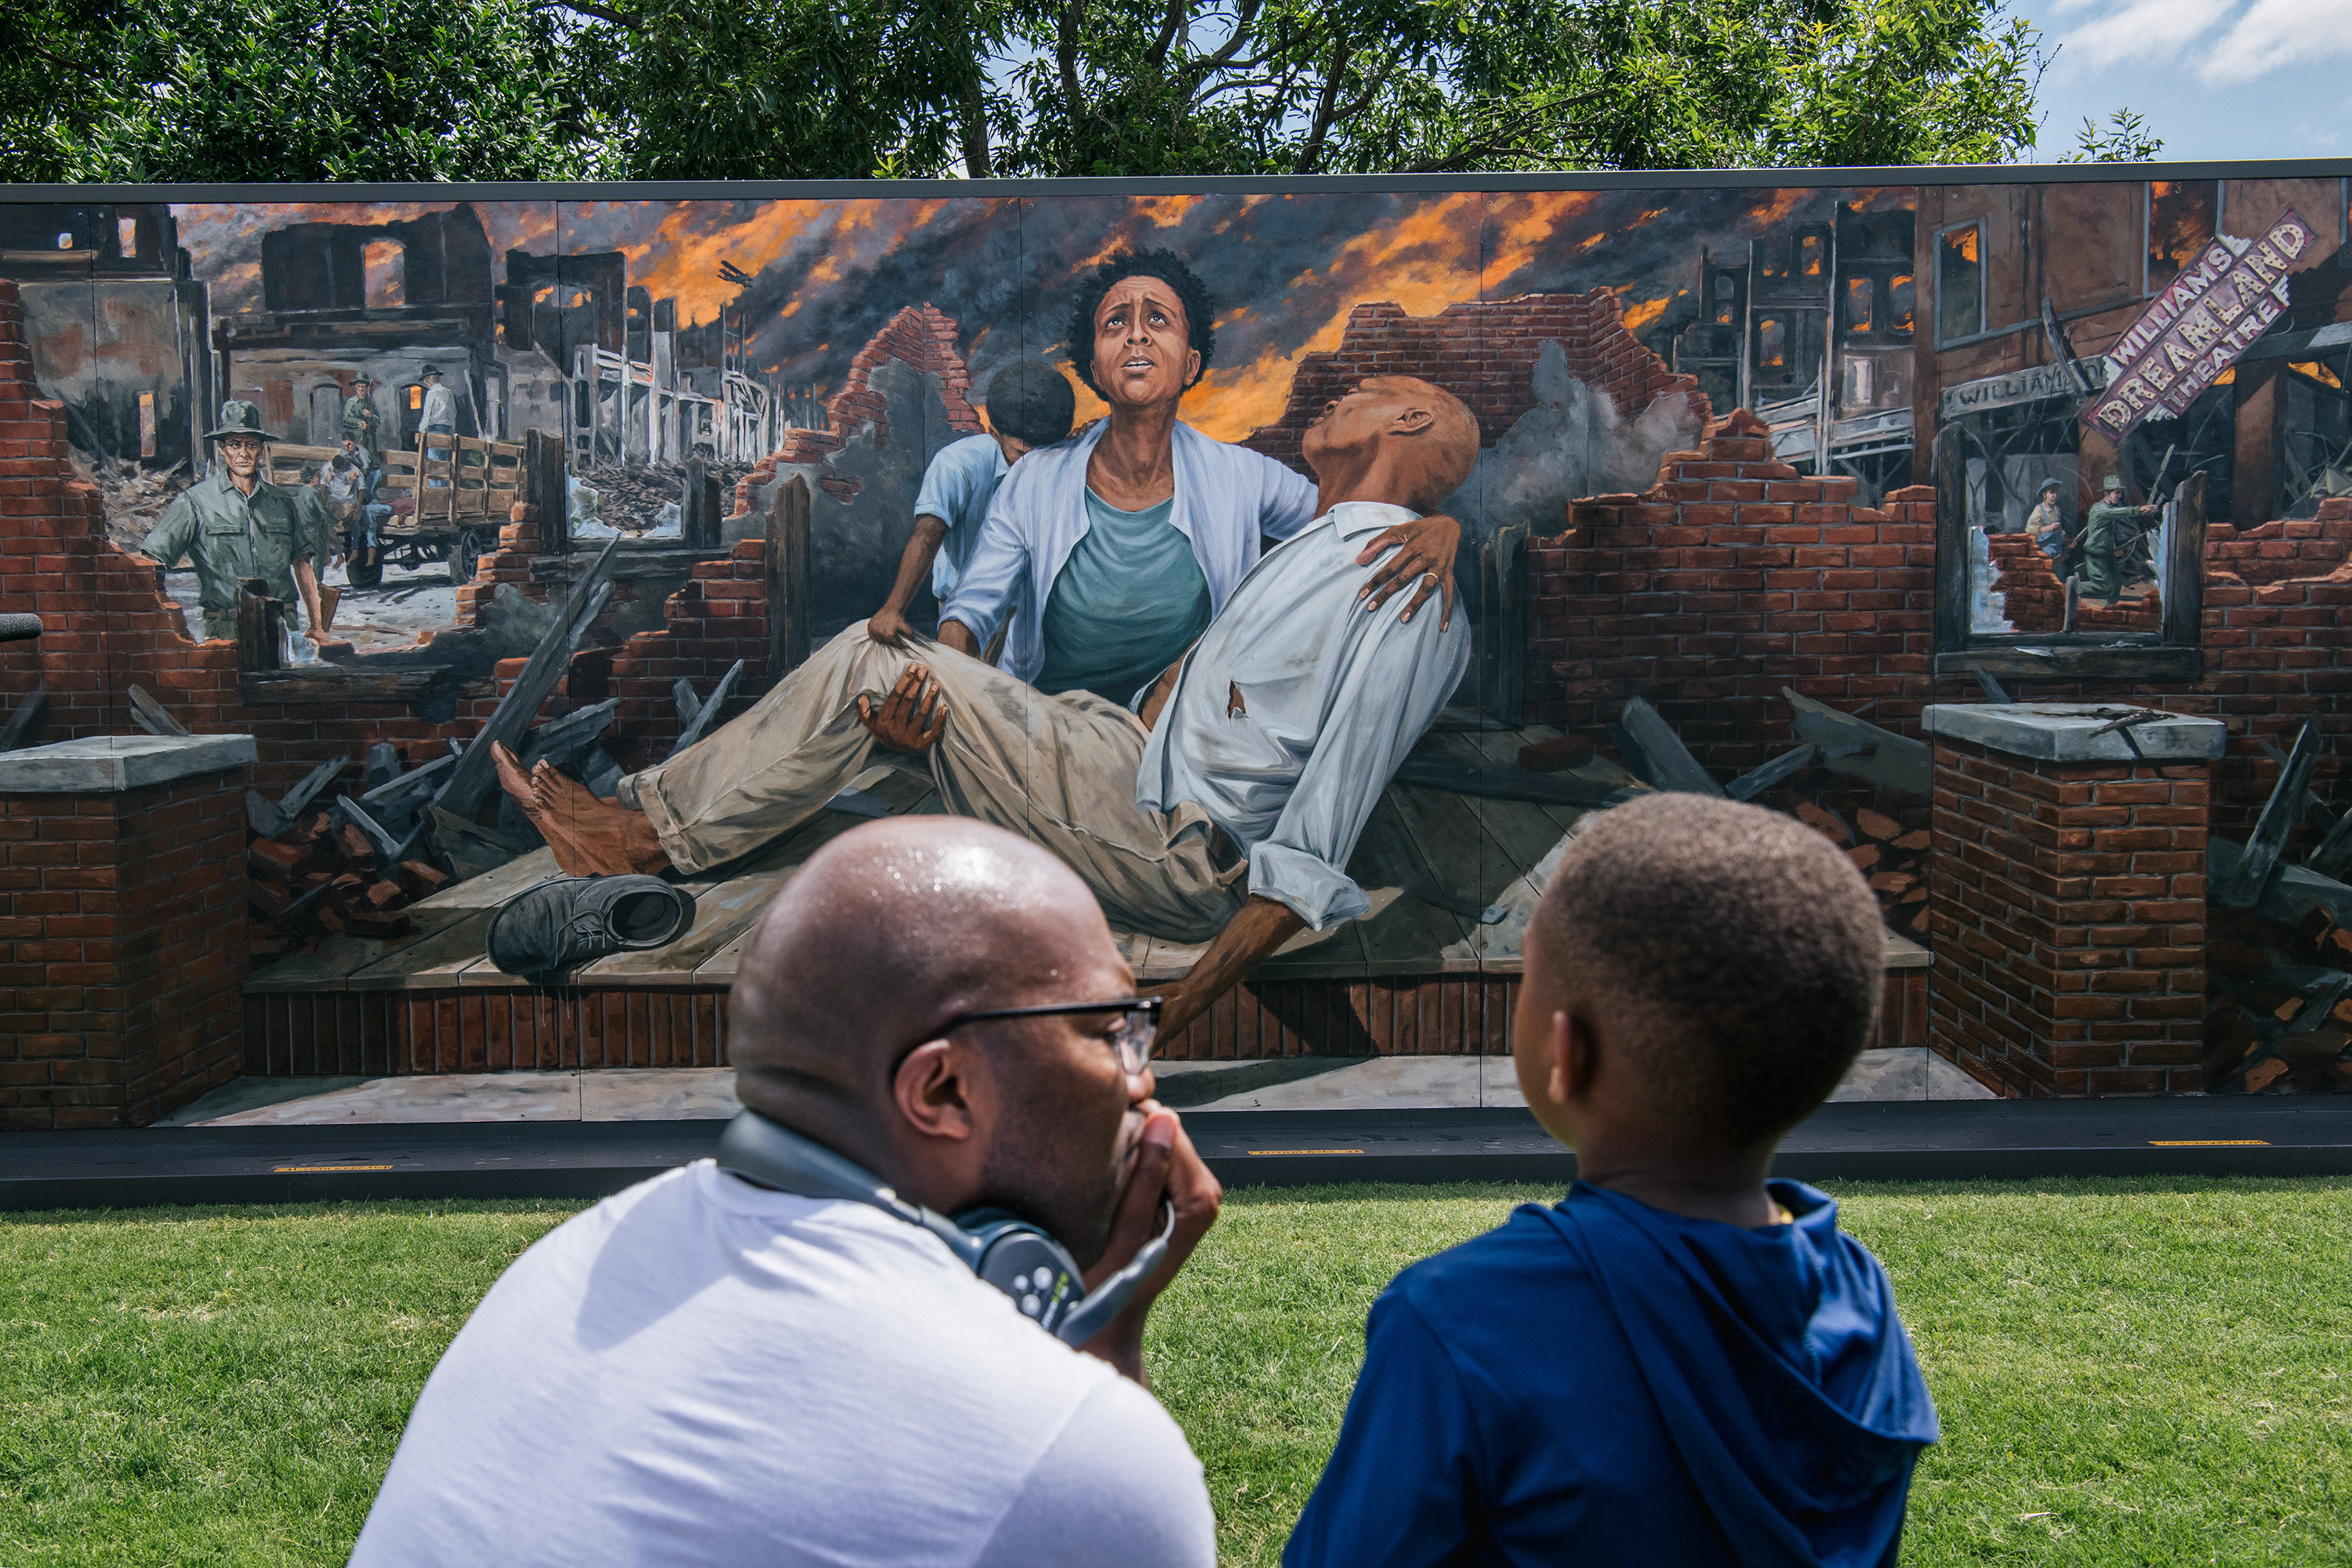 A man in glasses squats on the ground next to a young boy in front of a mural of a woman crying over the body of a man with burning buildings behind him